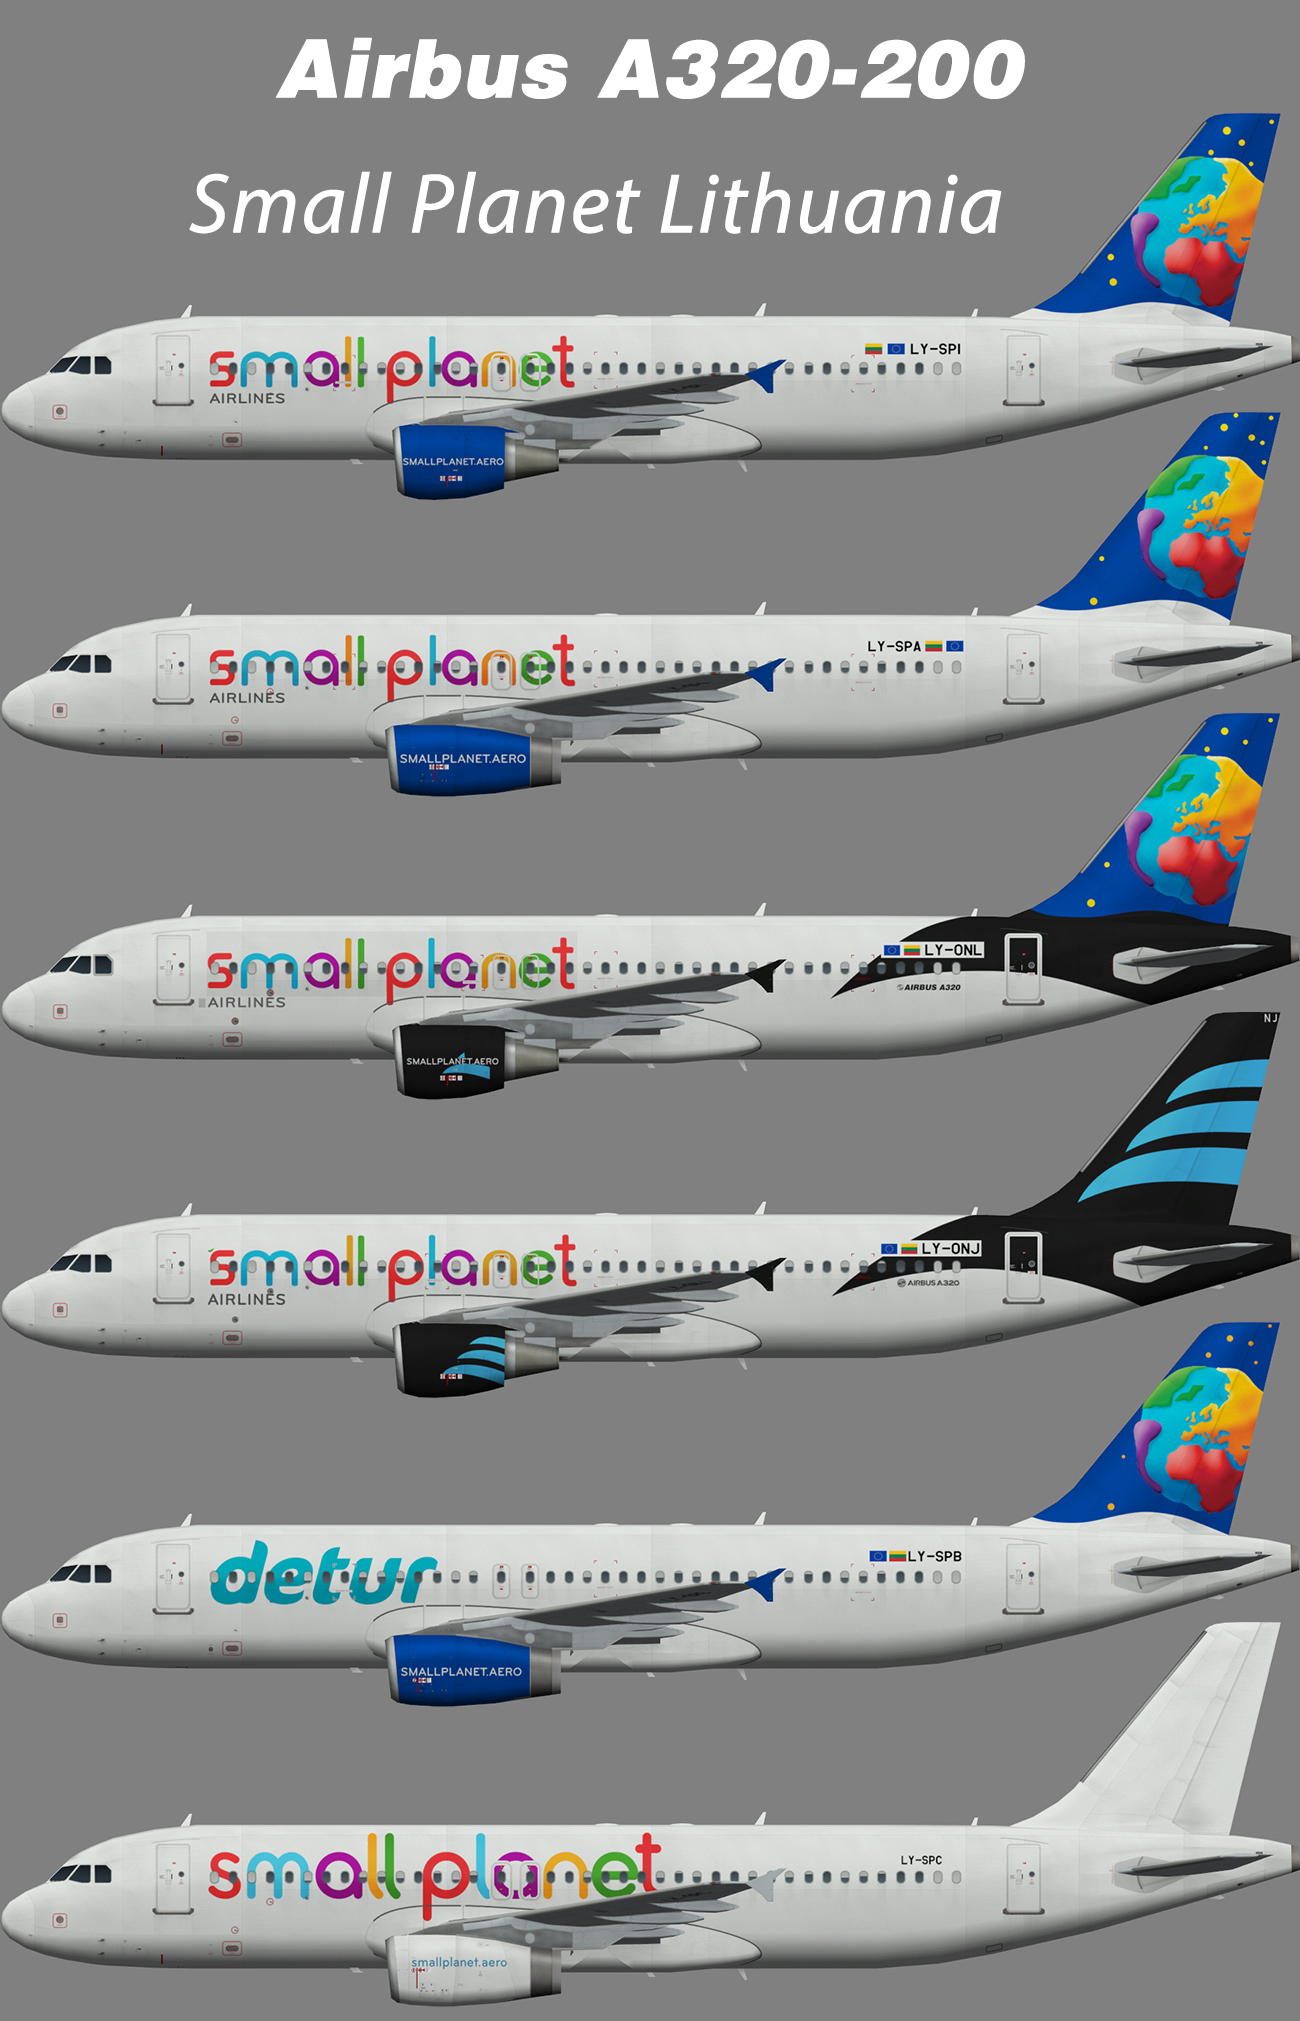 Small Planet Lithuania Airbus A320-200 – Nils